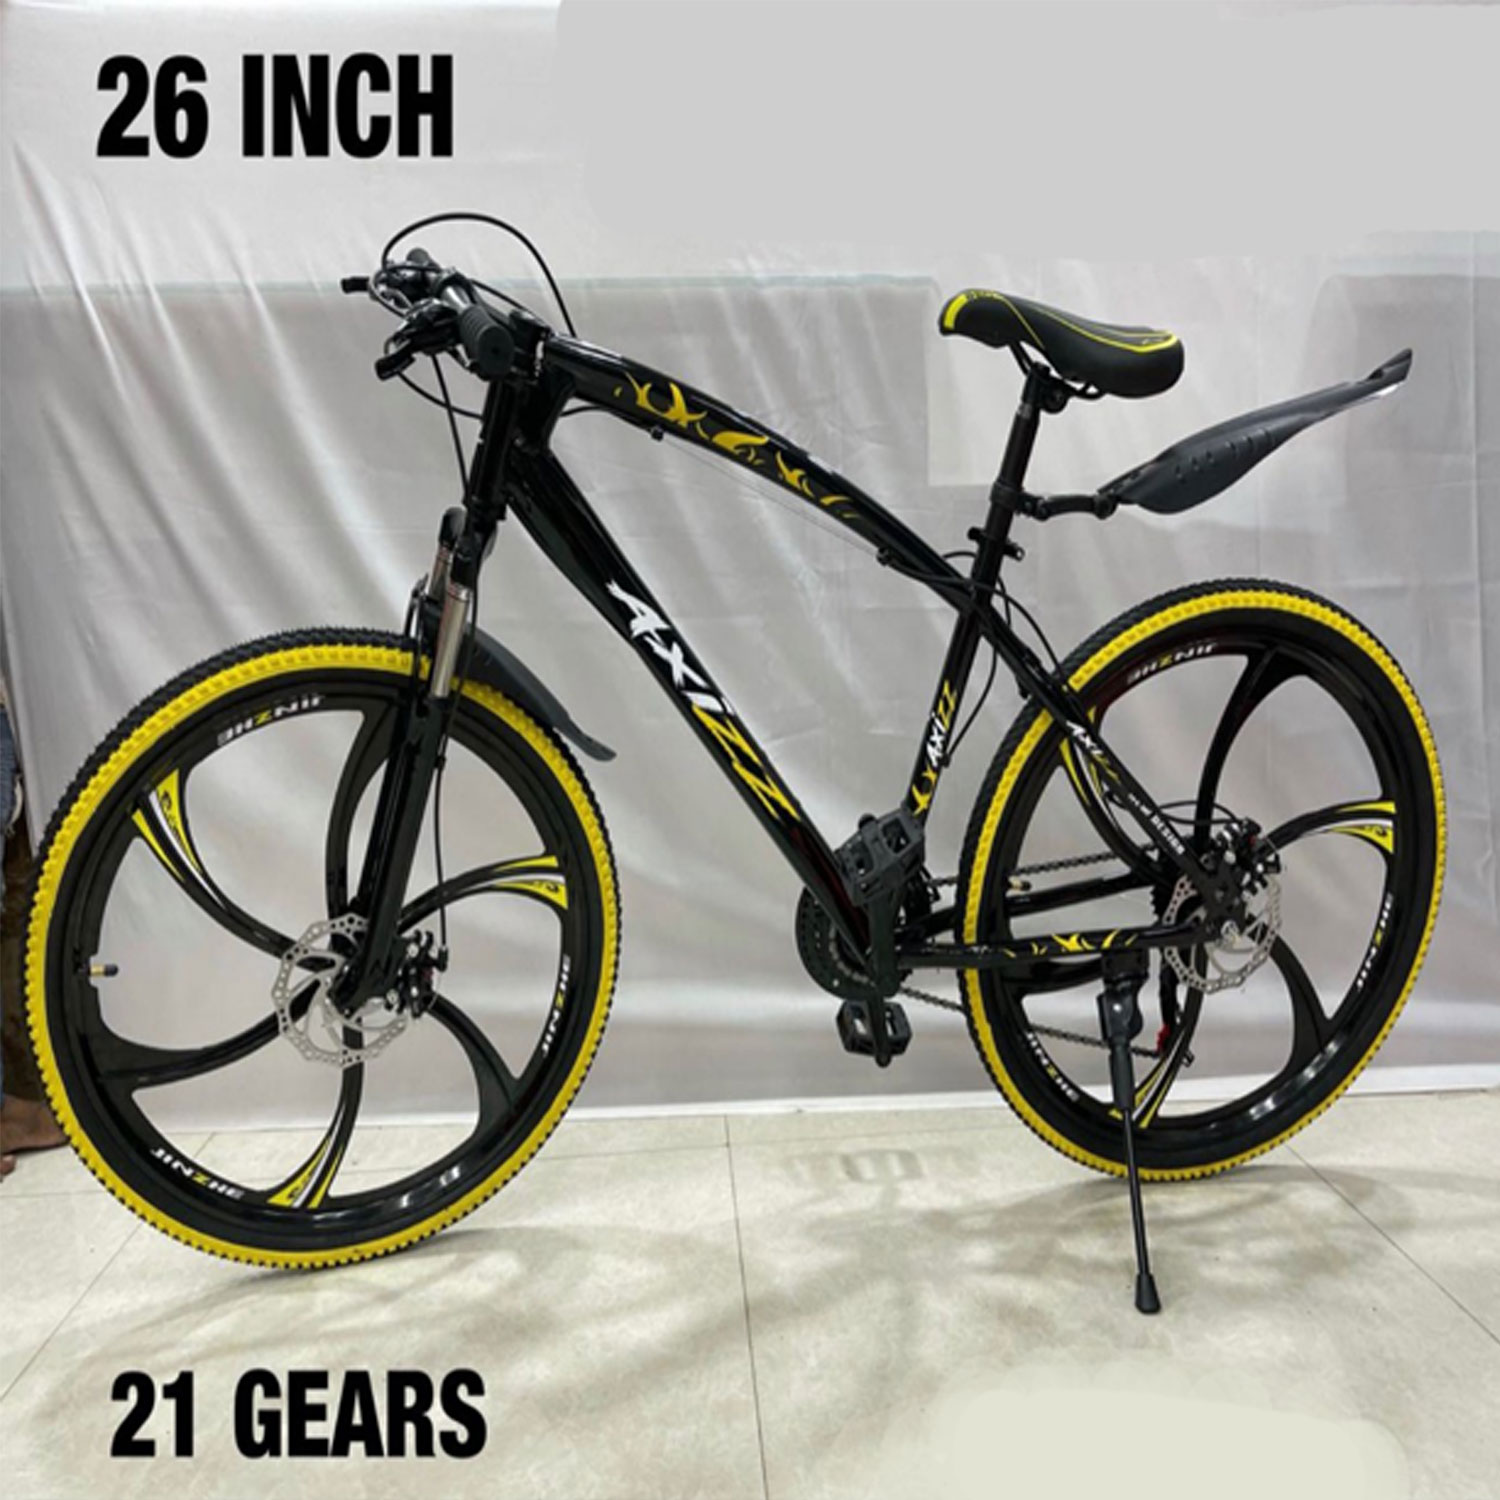 Cycle for Kids | Bike for Boys and Girls | Yellow | MD-457 (26" inch)